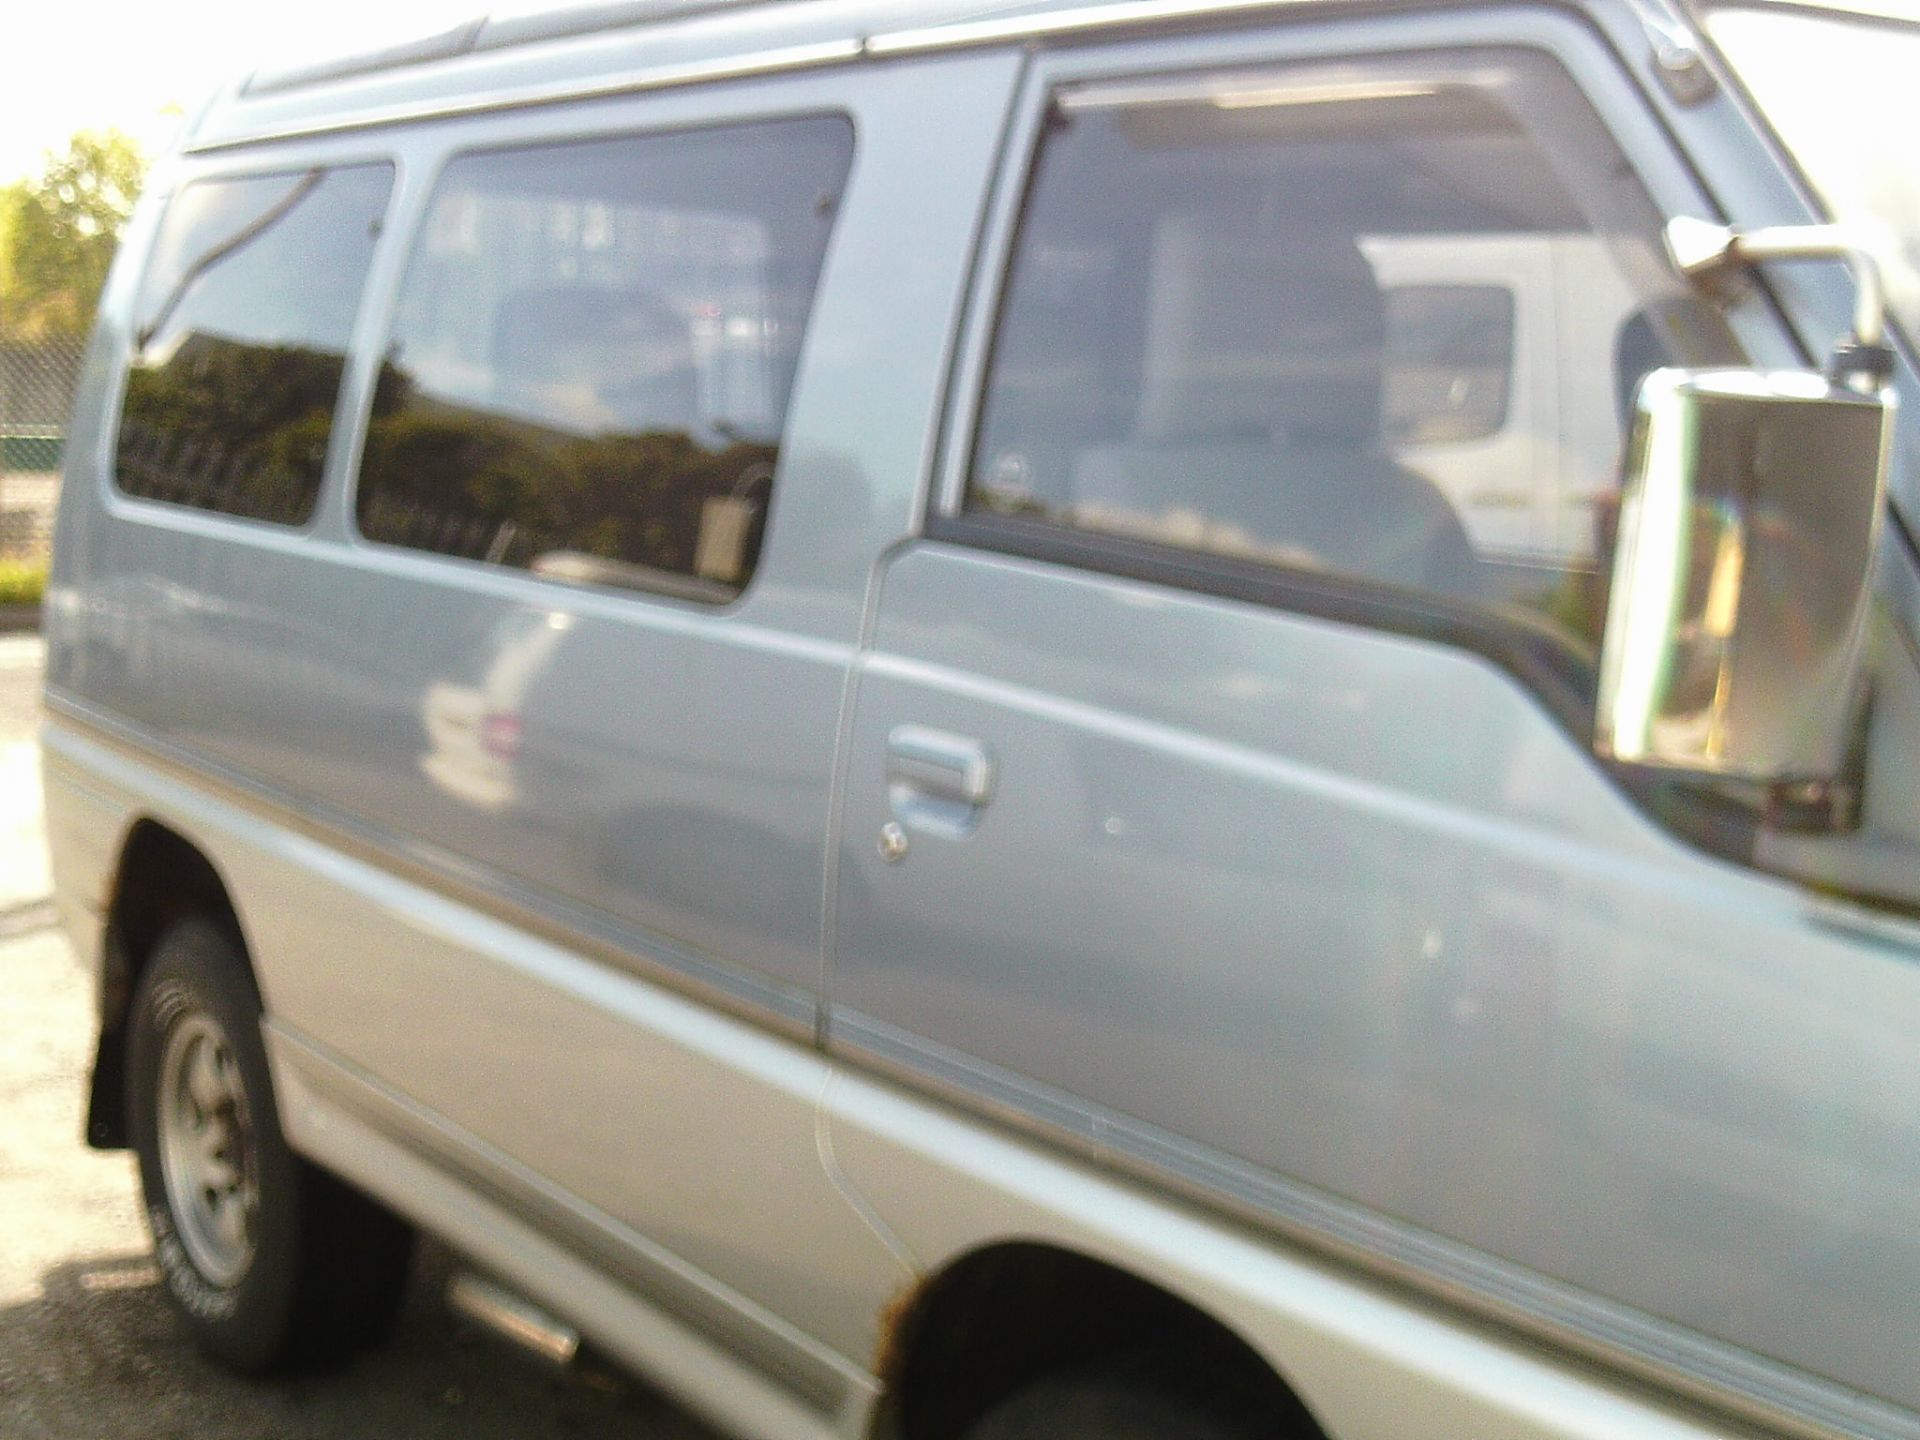 1993/K REG MITSUBISHI DELICA 4WD MPV 2.5 DIESEL FULLY RECONDITIONED ENGINE (WITH PAPERWORK) *NO VAT* - Image 5 of 20